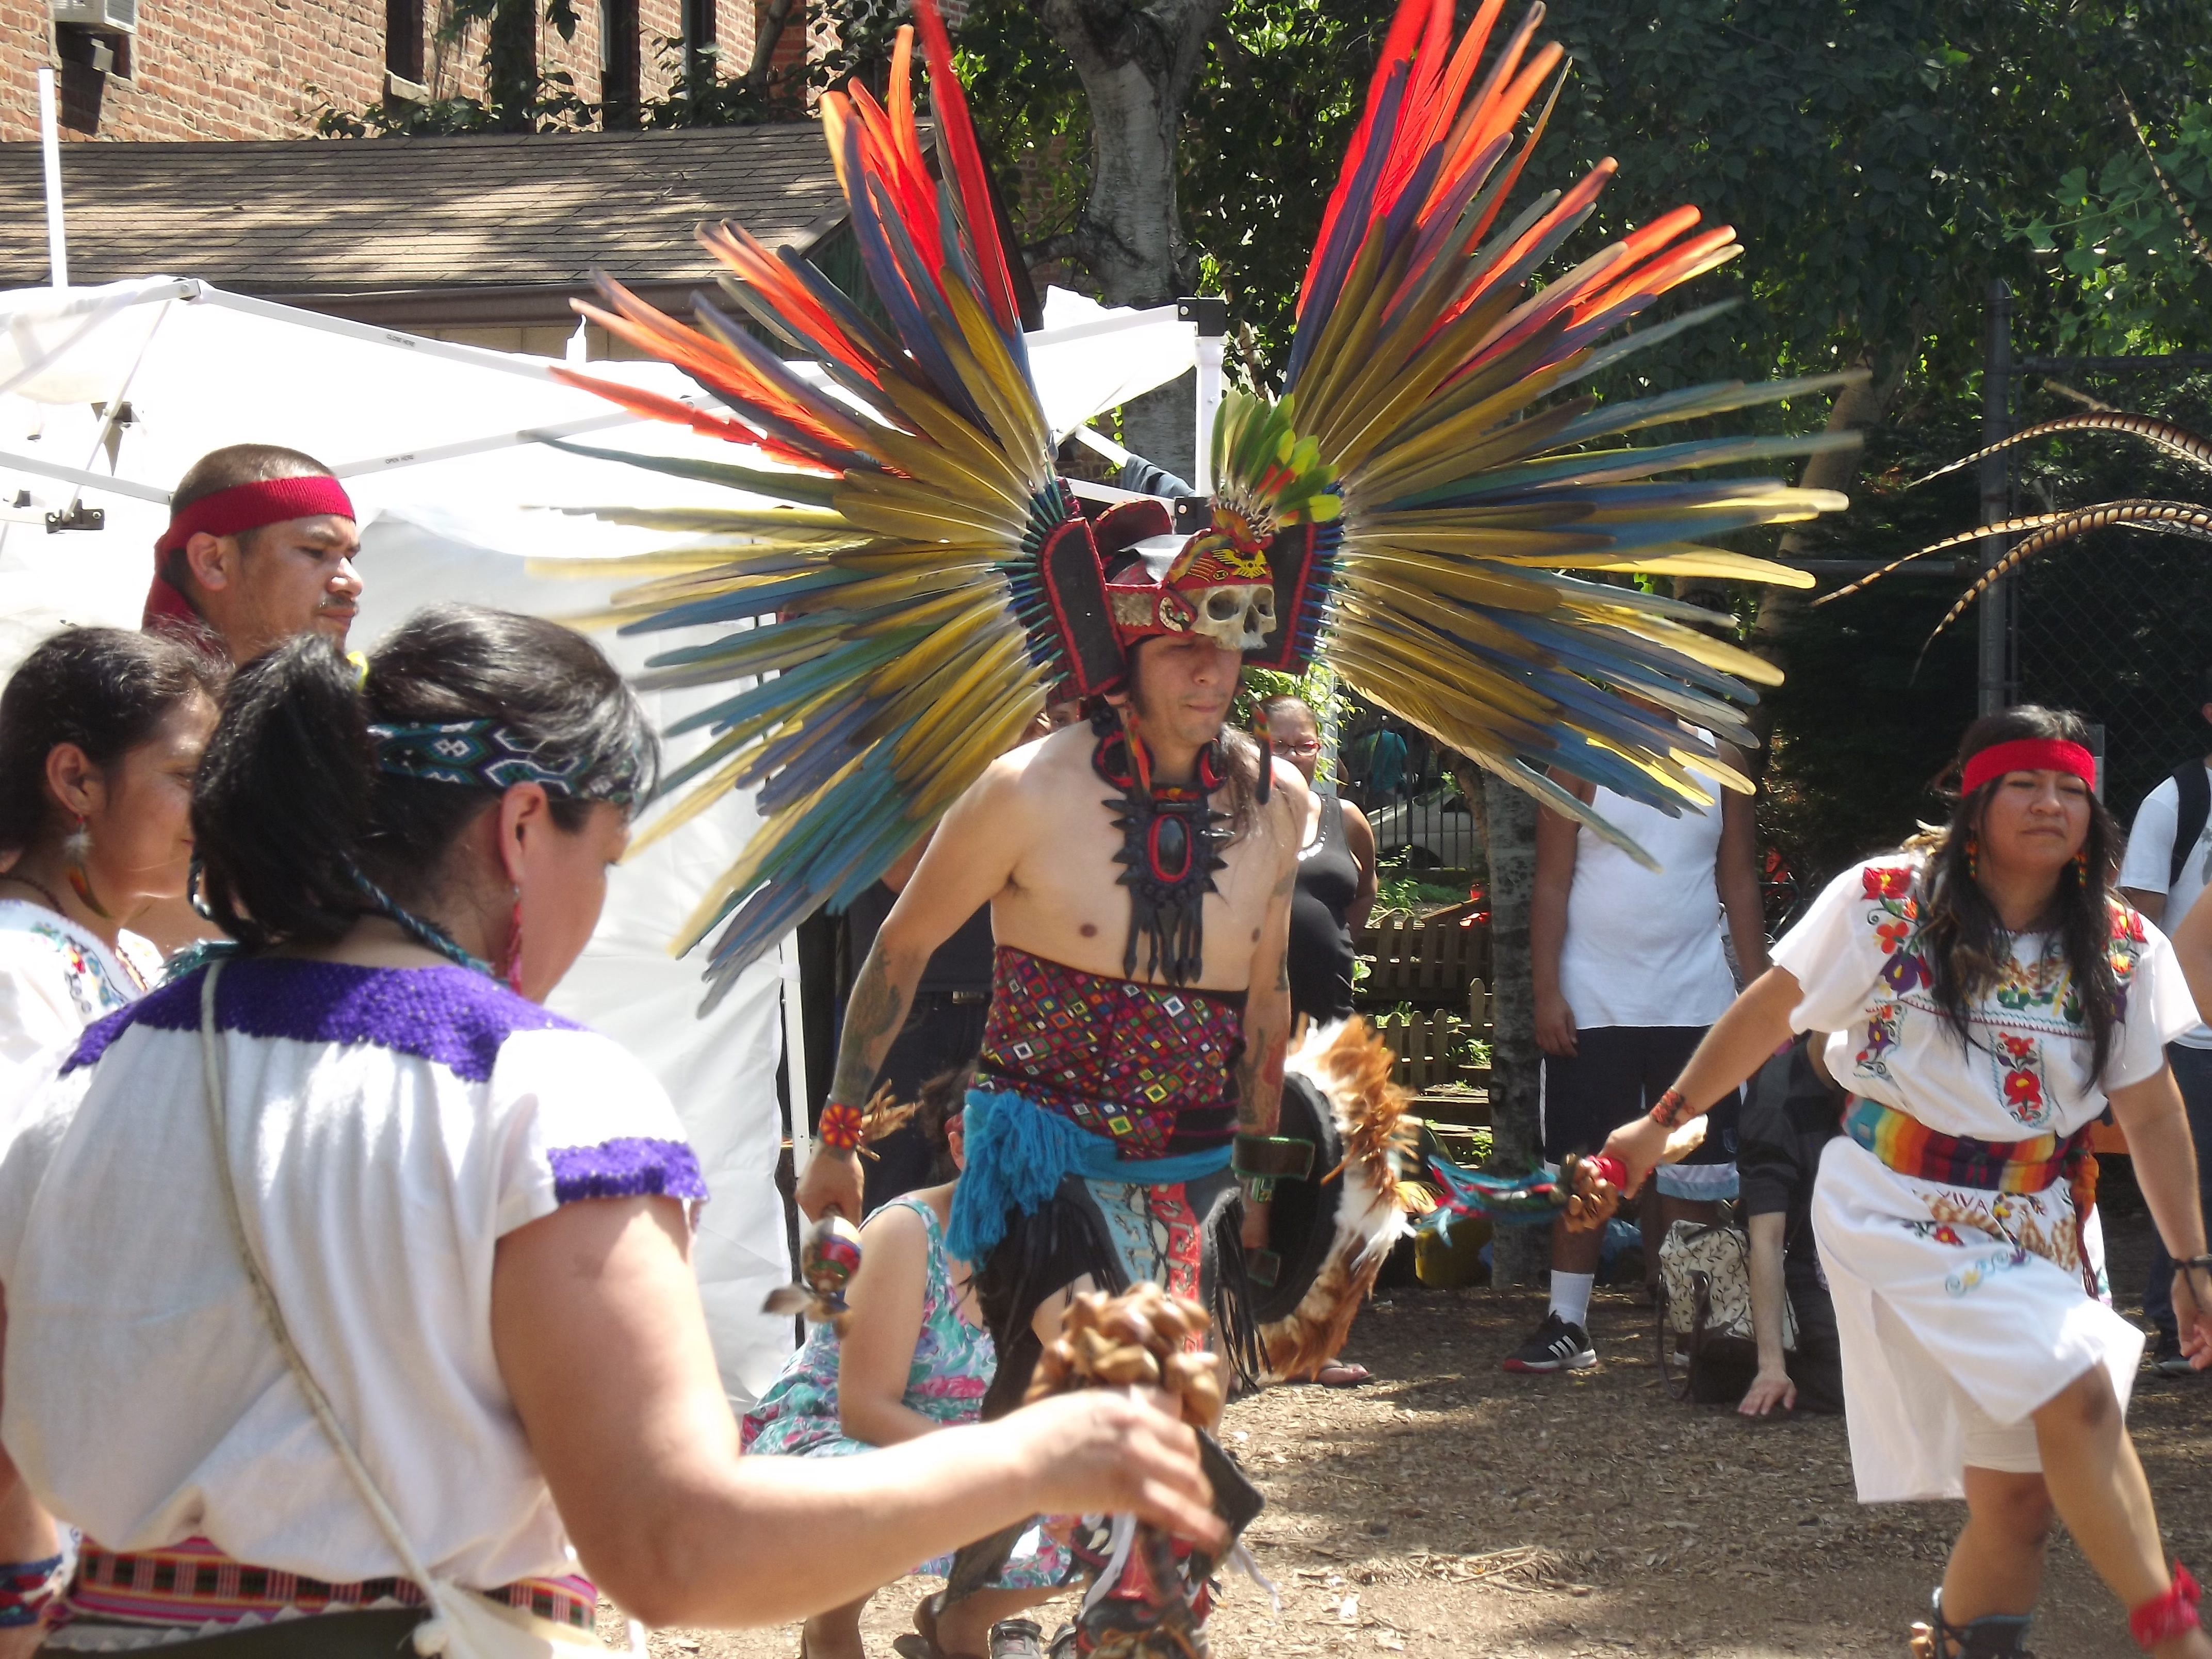 Brook Park hosts traditional Mexican dance